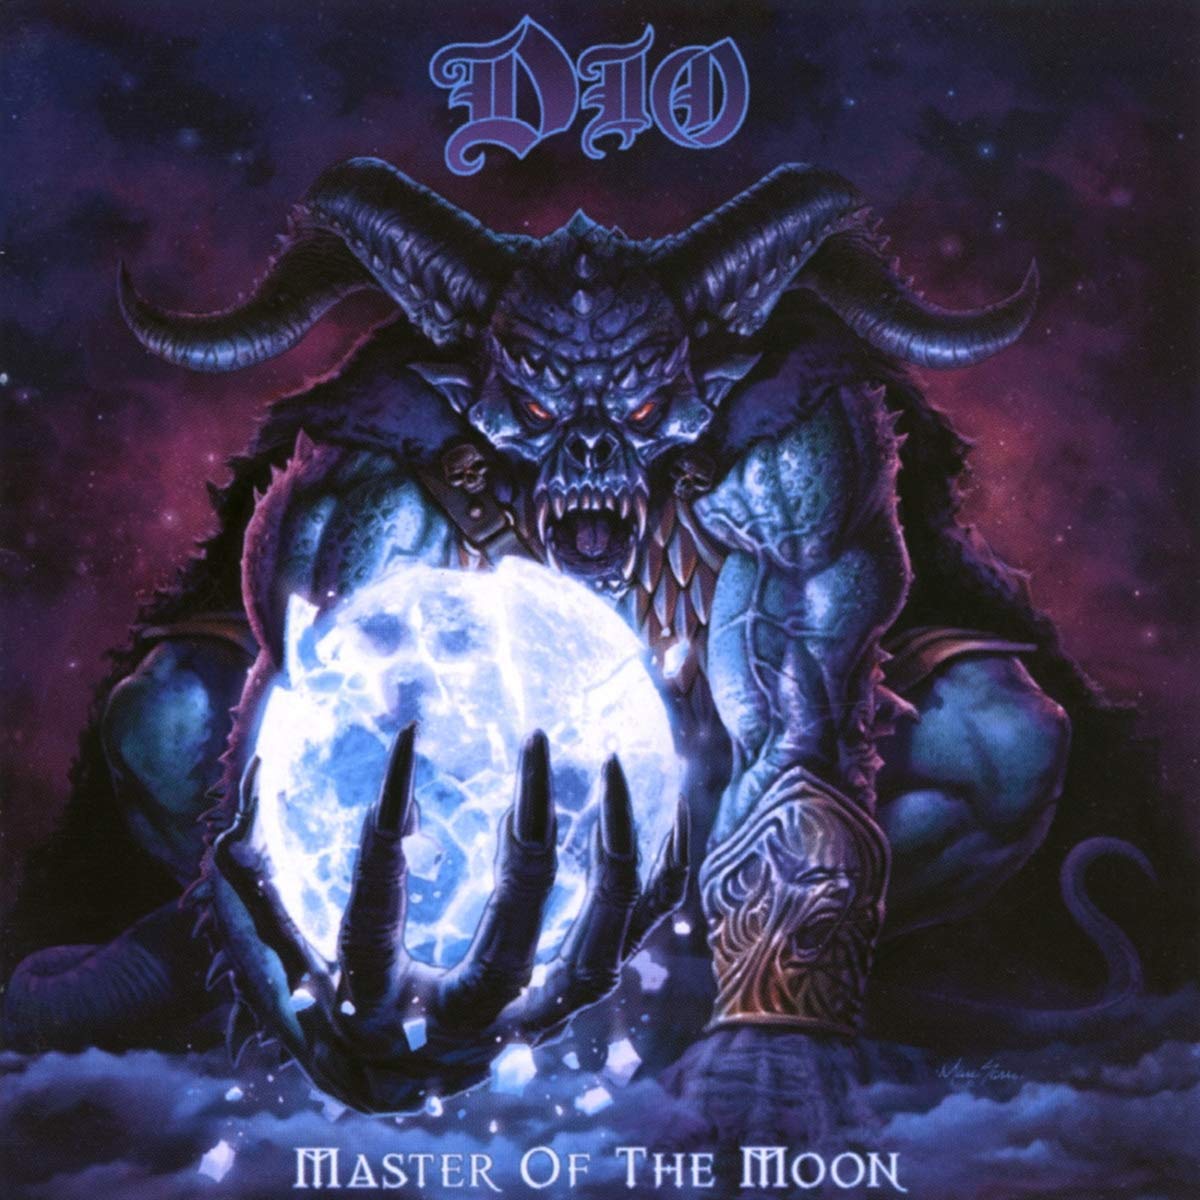 MASTER OF THE MOON-DIO